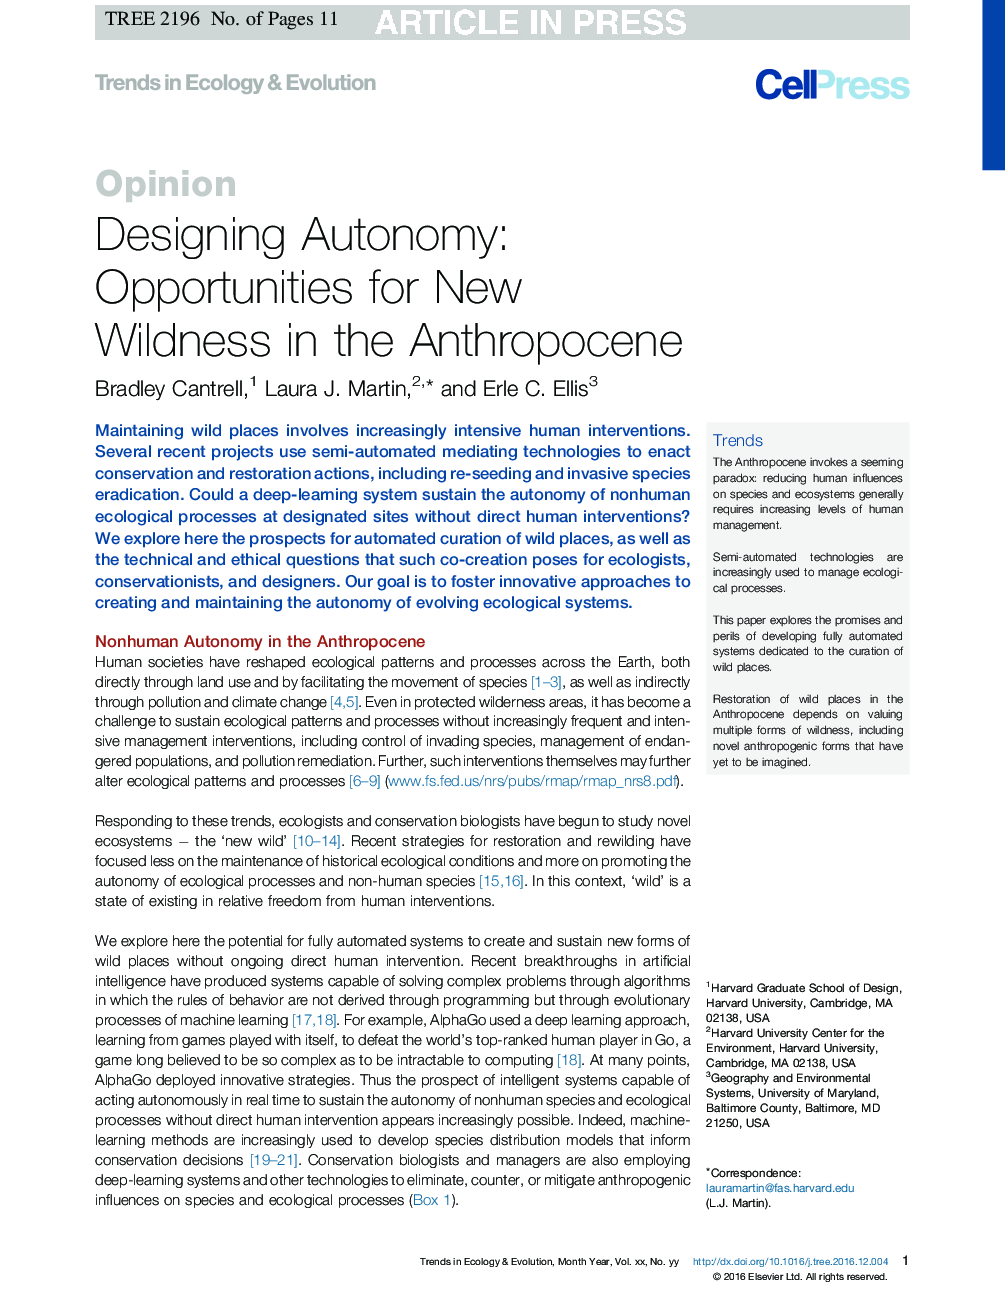 Designing Autonomy: Opportunities for New Wildness in the Anthropocene